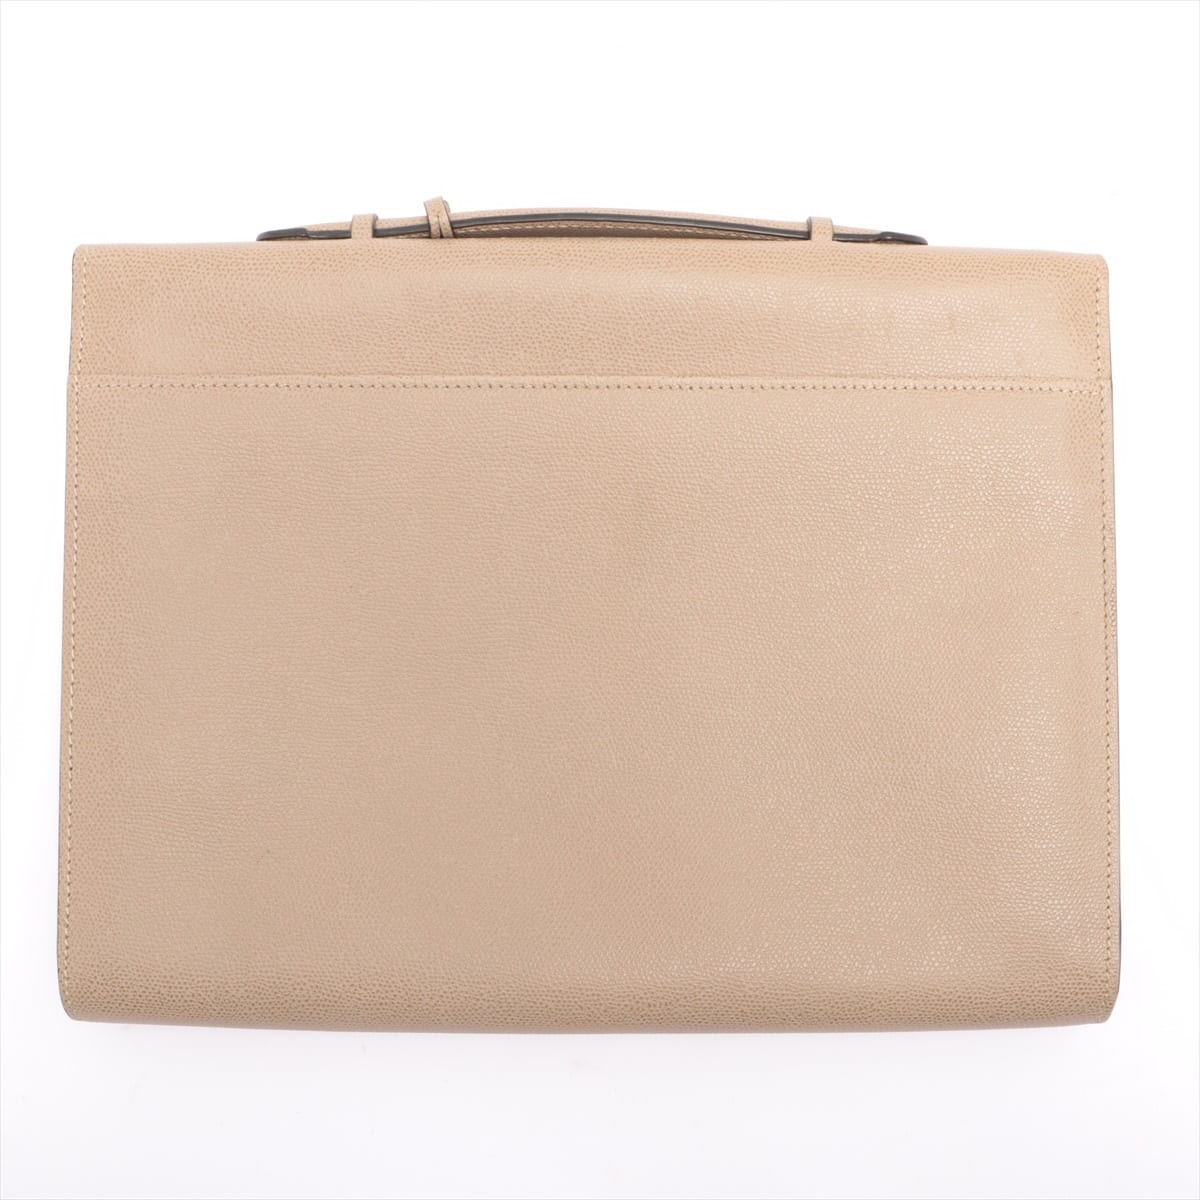 Valextra Leather Briefcase Beige The edge is slightly solid